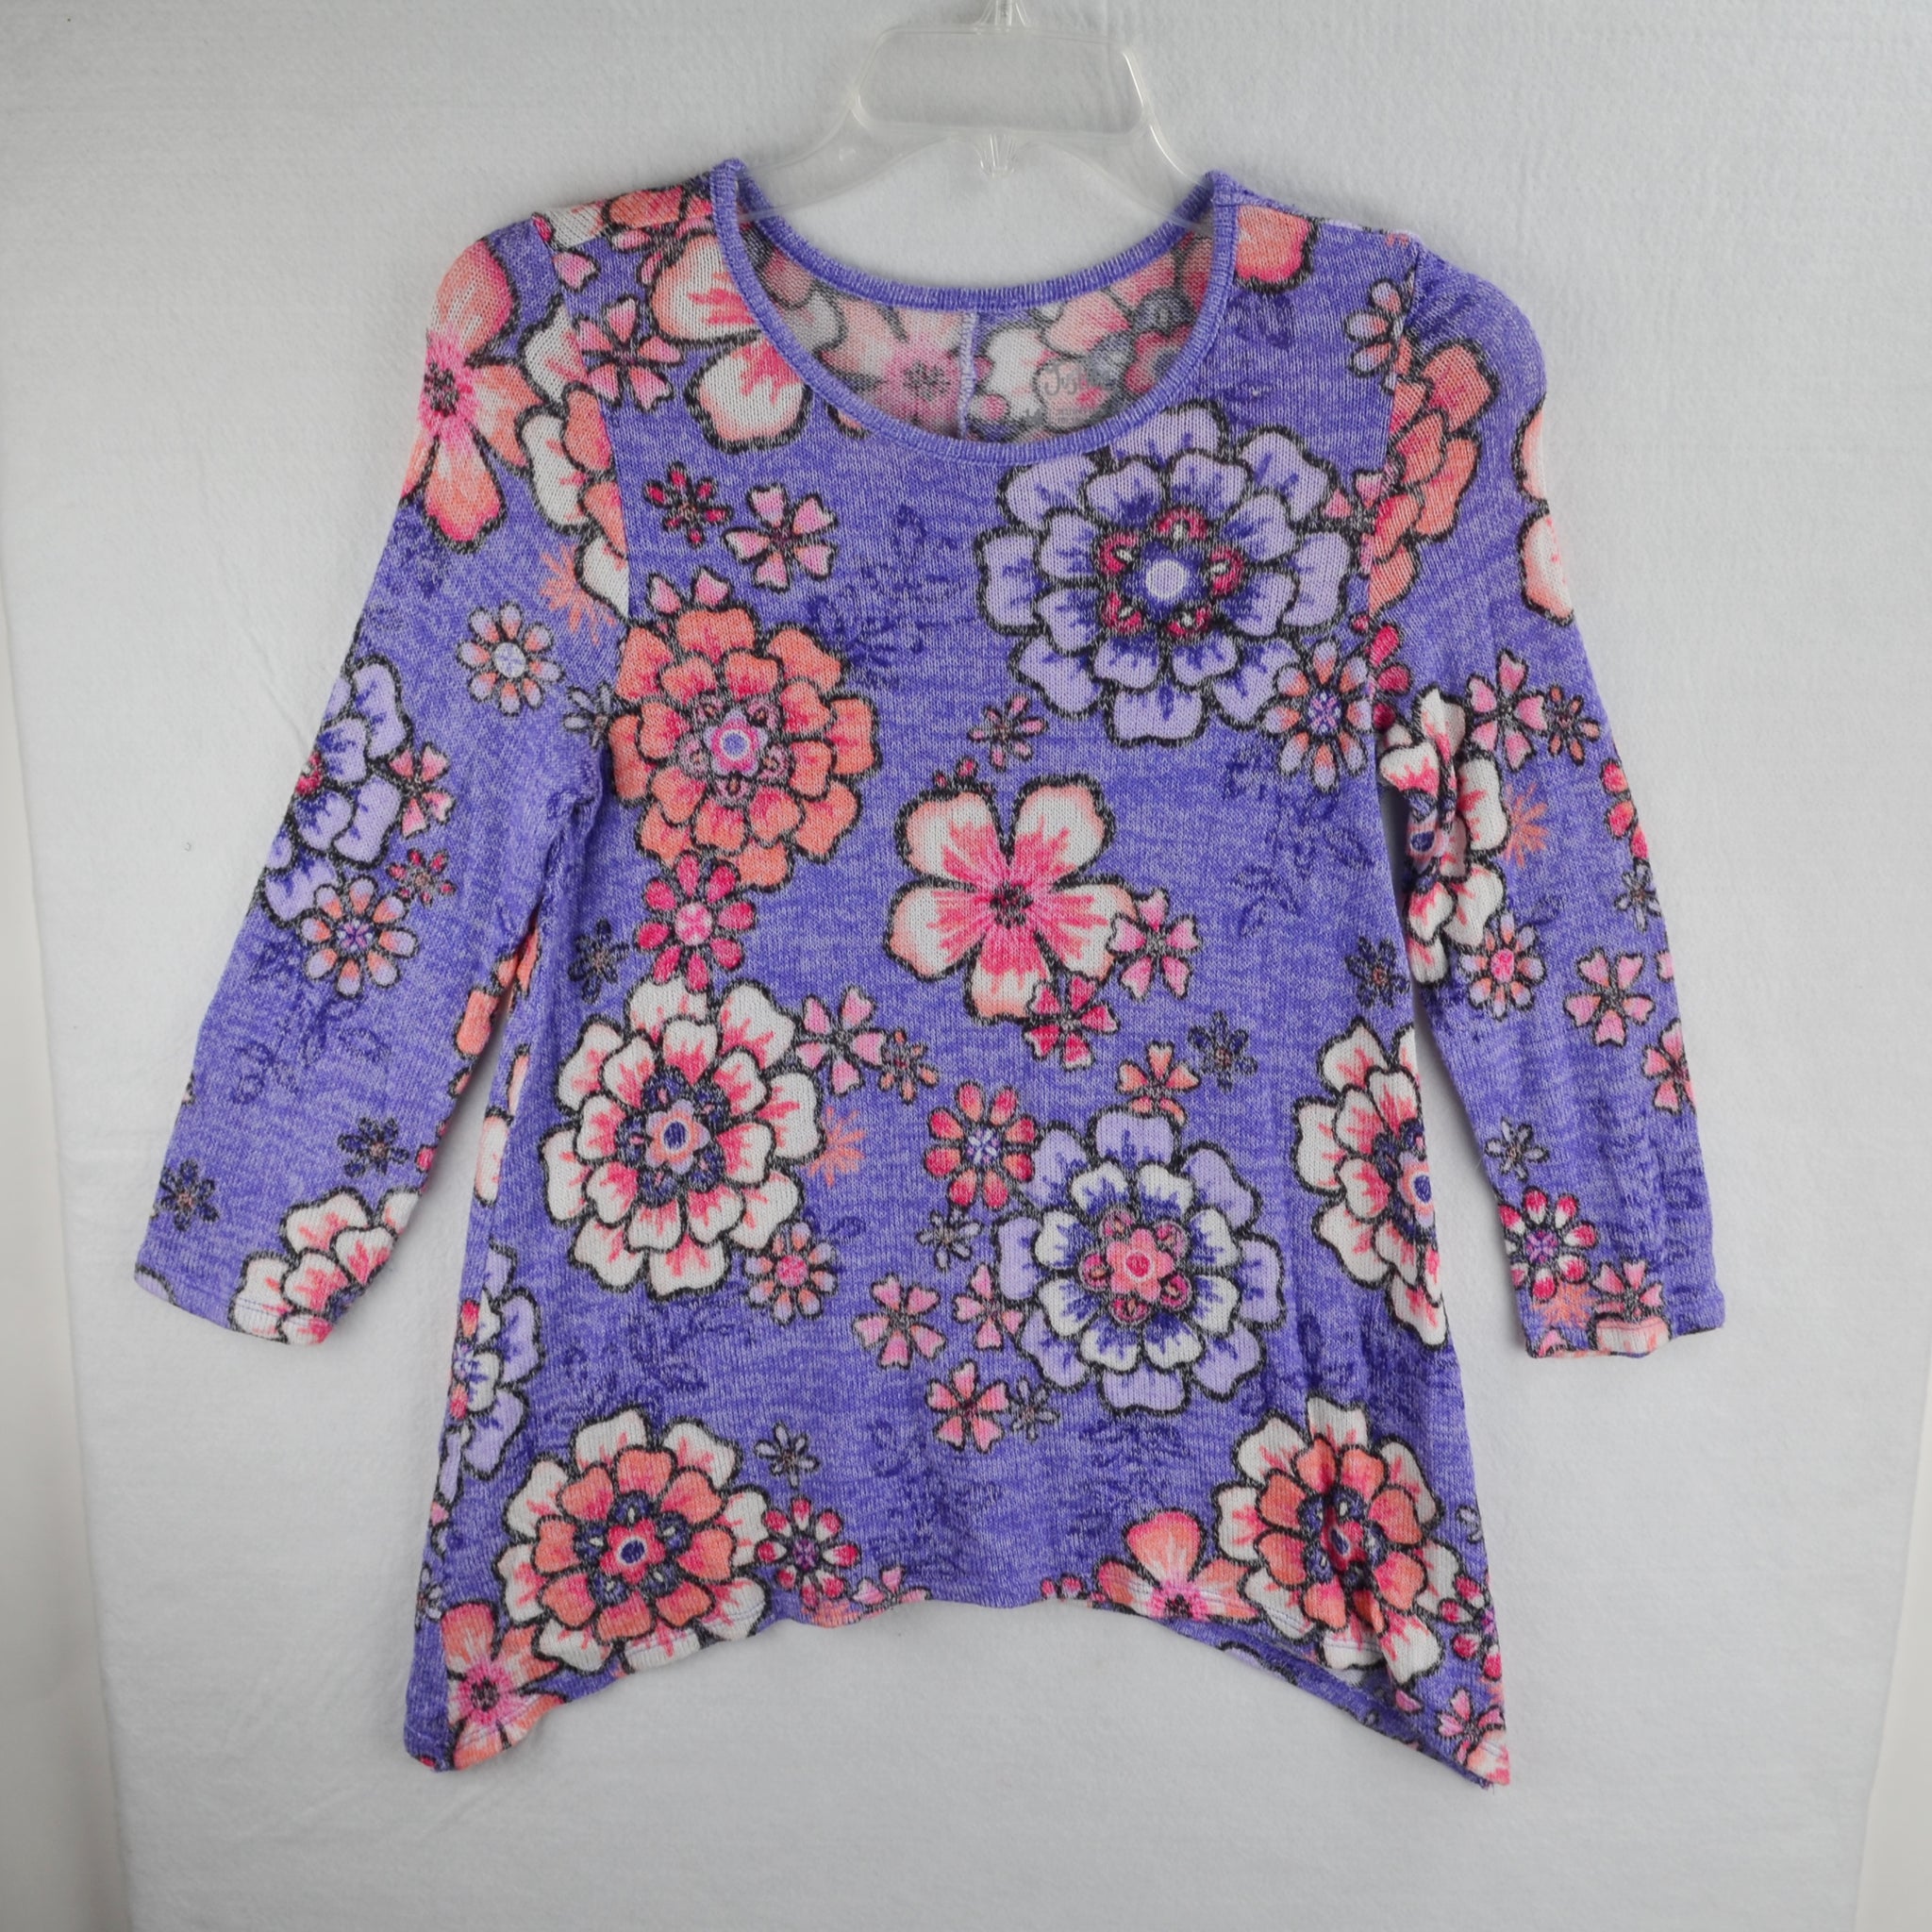 Justice Girls Pull-Over Sweater - Purple Floral Shark-bite - Size 14